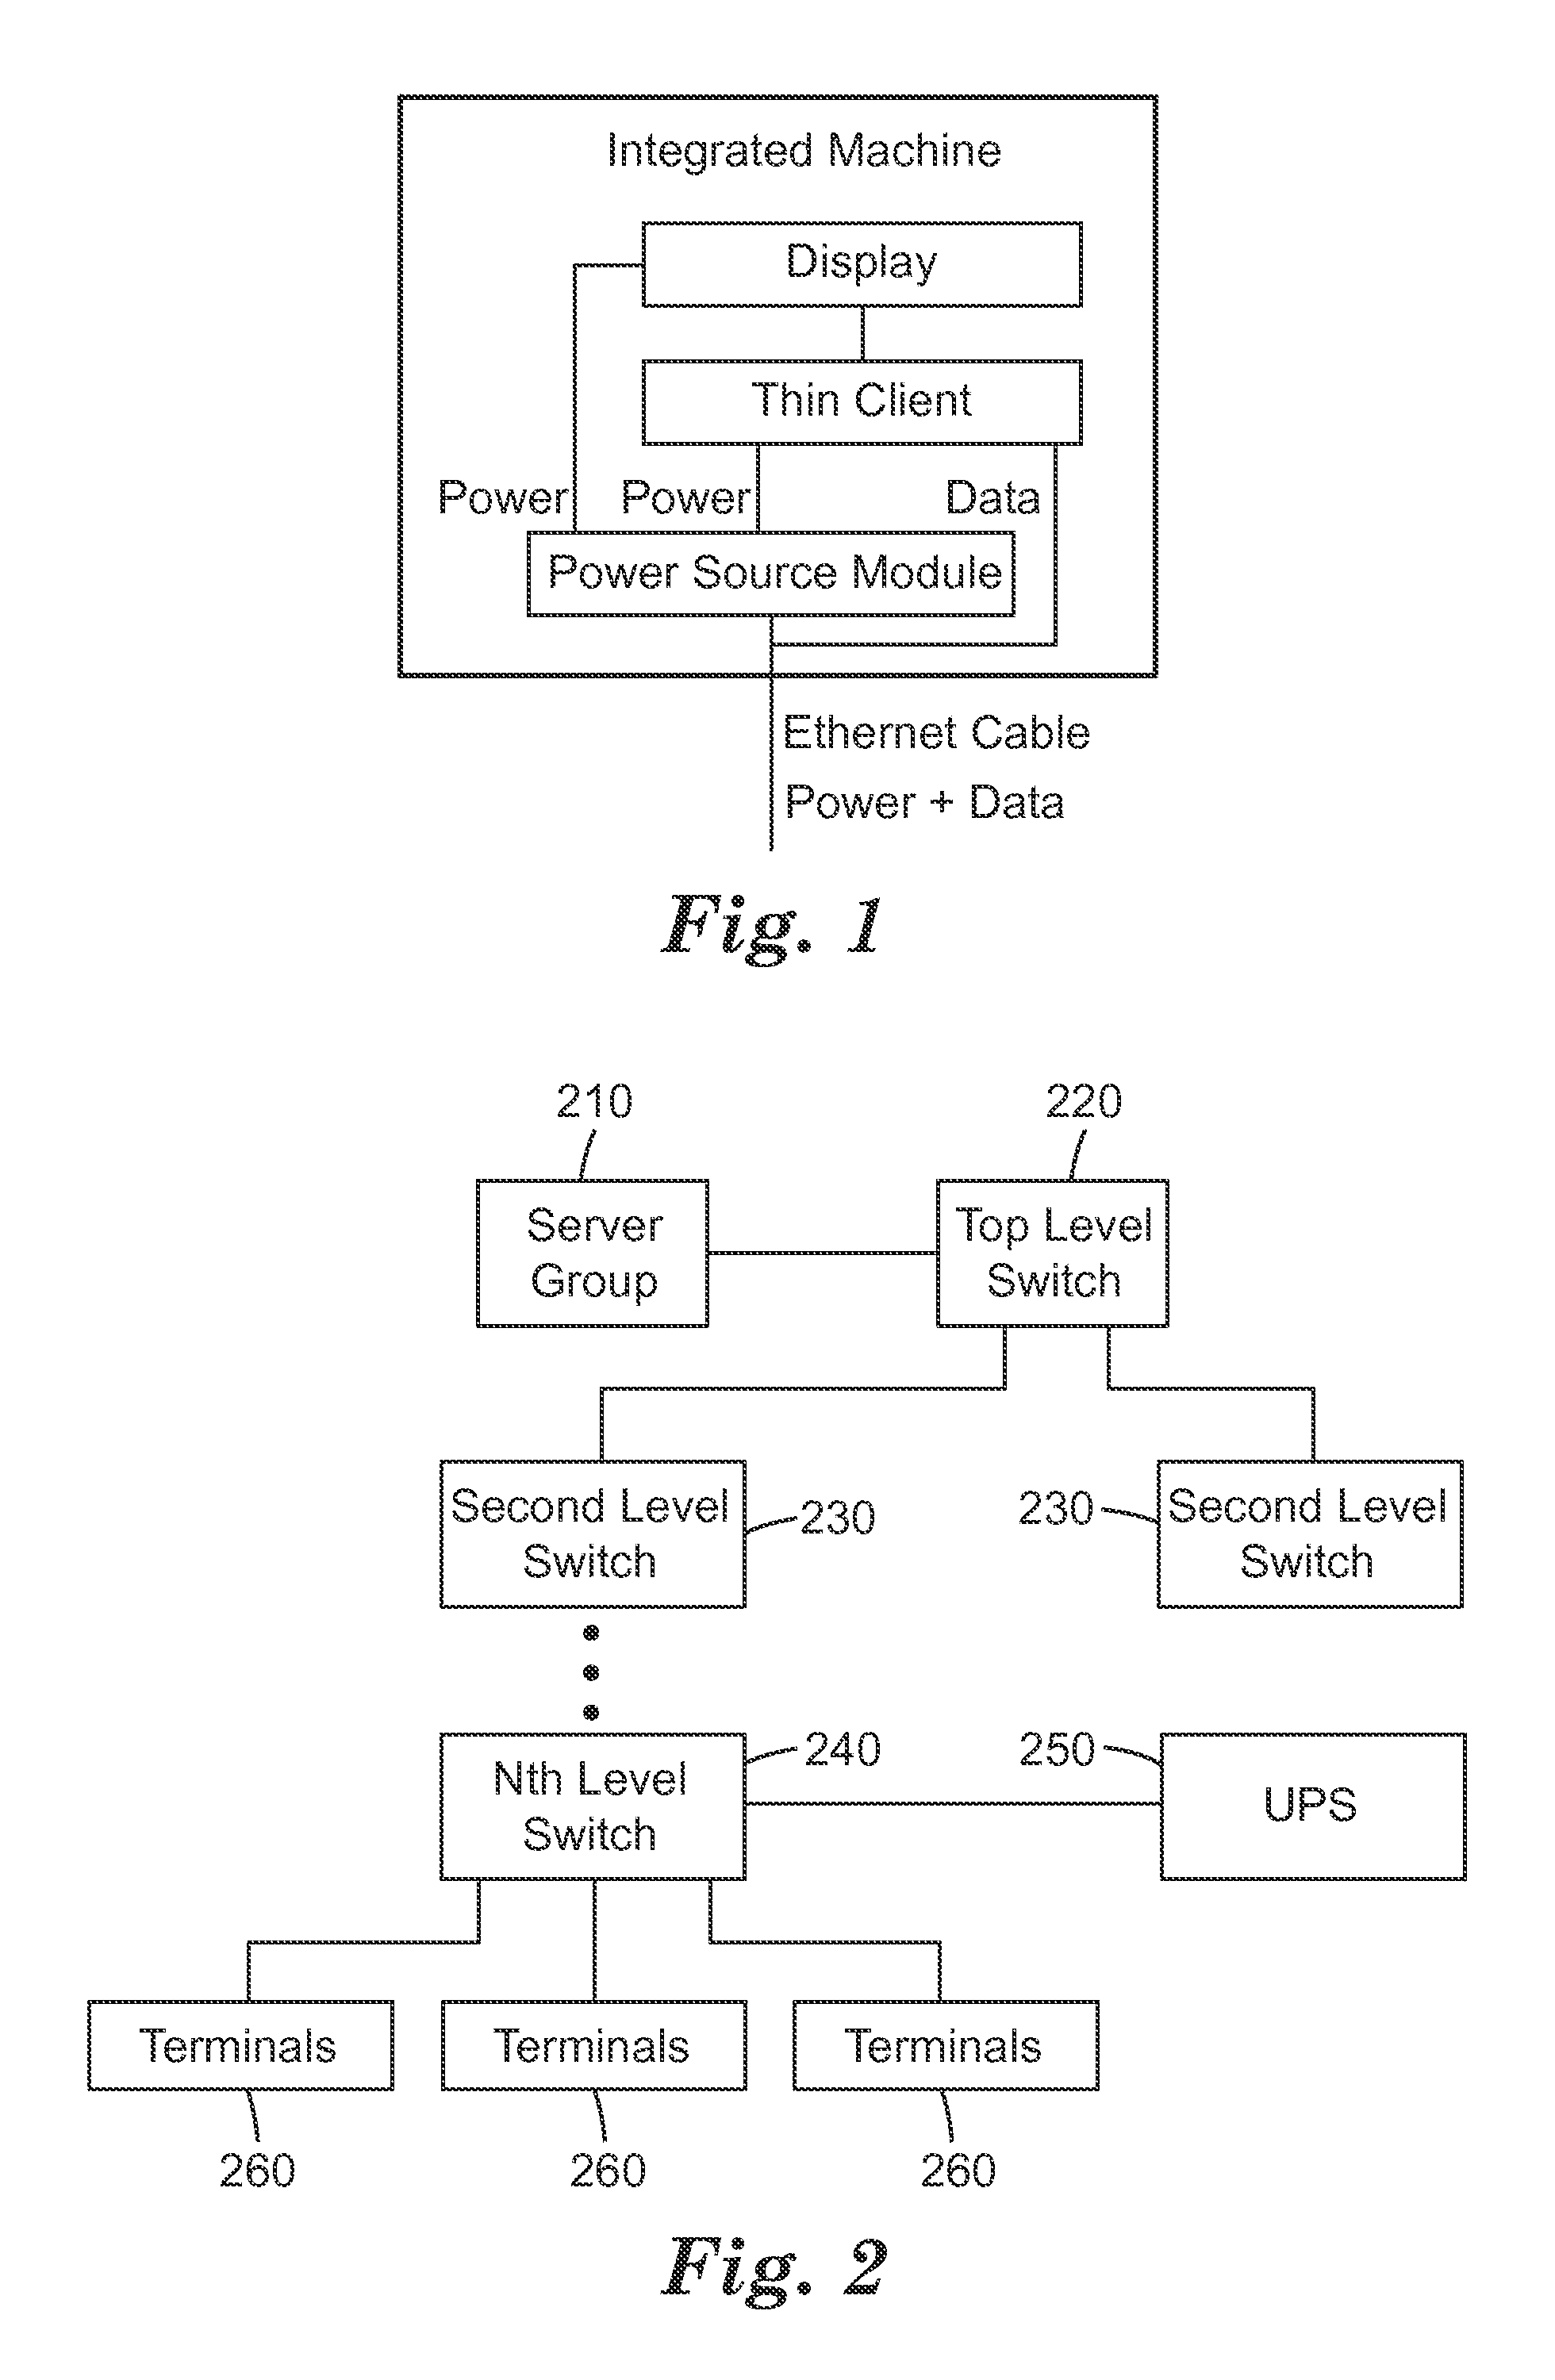 Power control device and power control method for thin client display